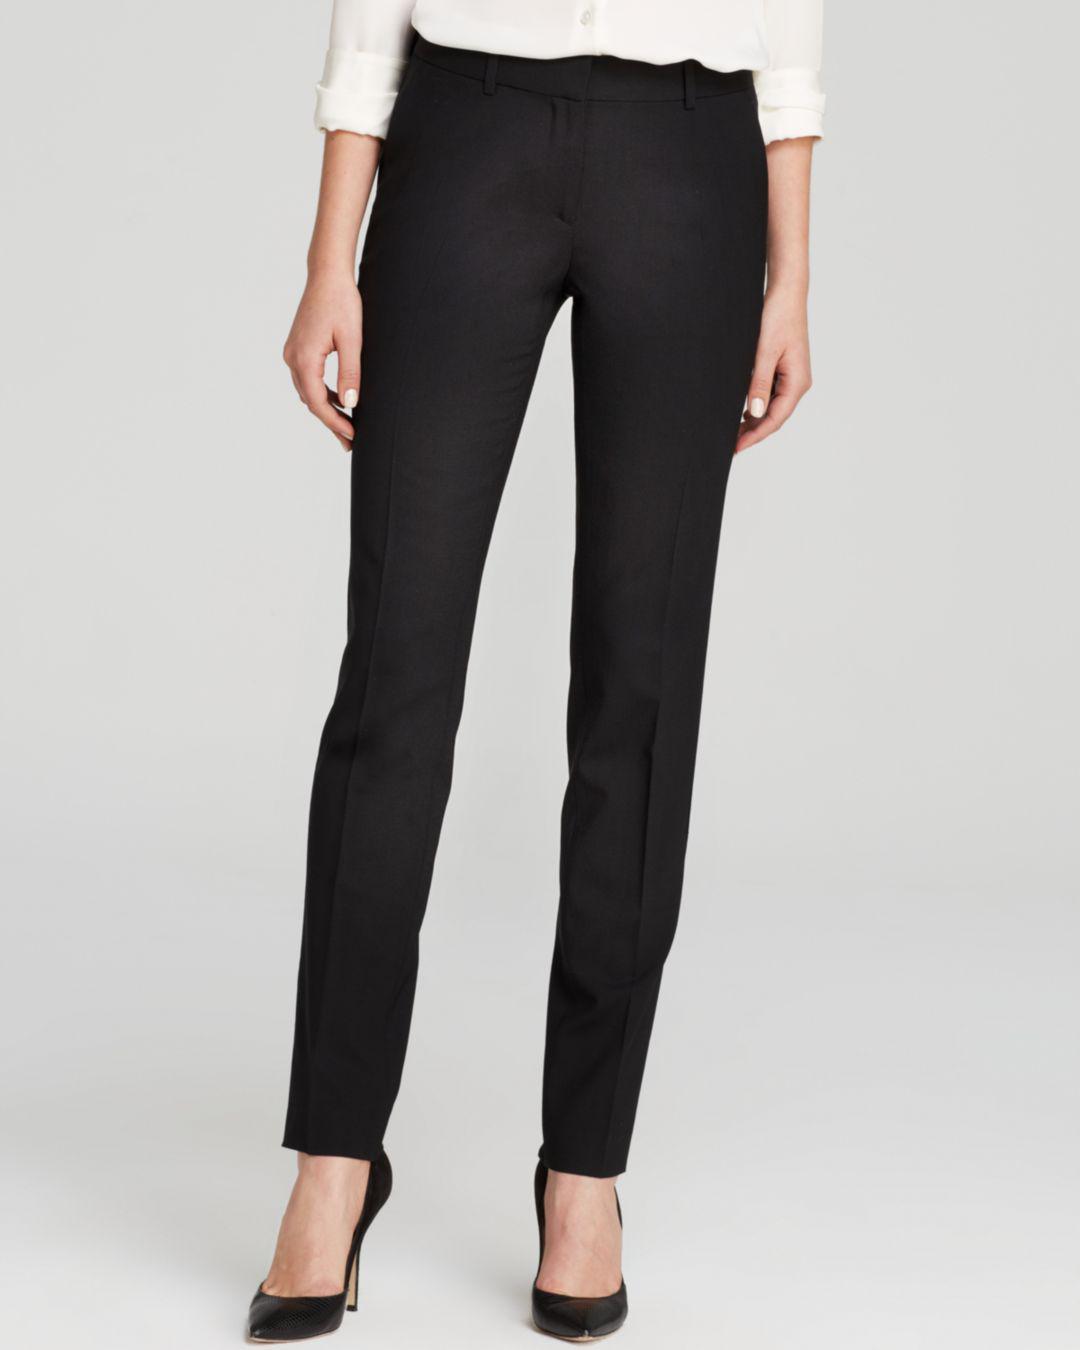 Theory Wool Pants - Super Slim Edition in Black - Lyst